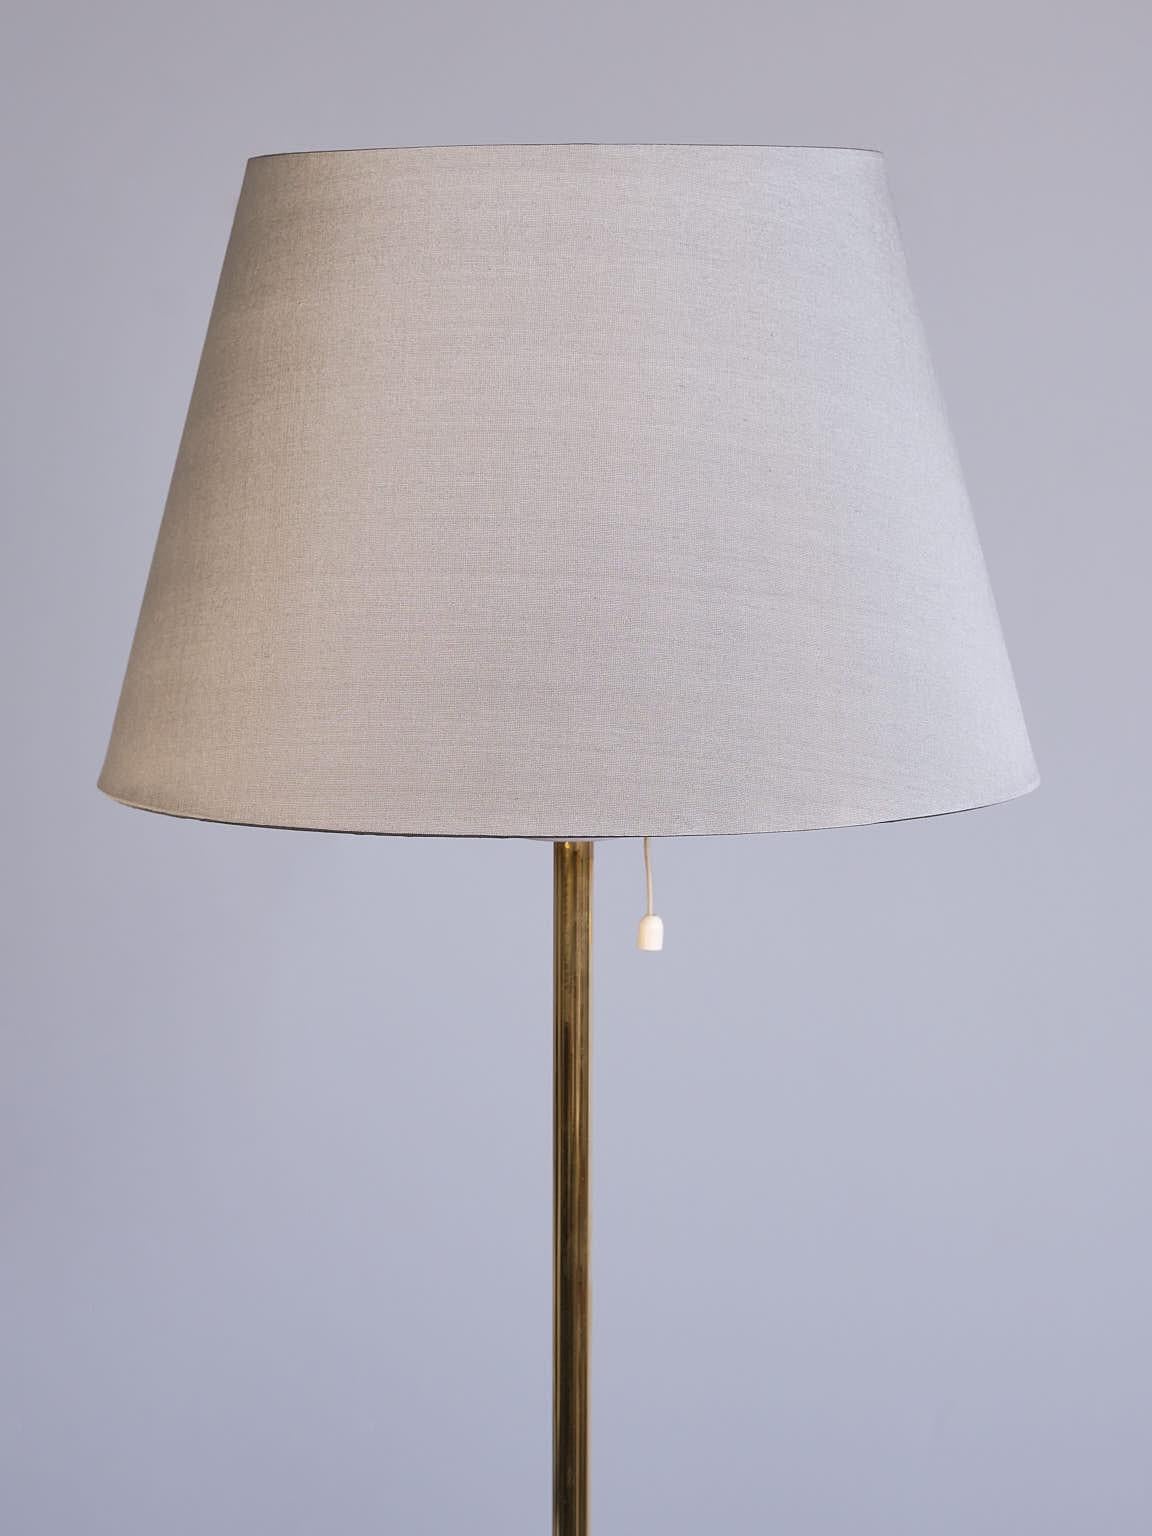 Falkenbergs Belysning Floor Lamp in Glass and Brass, Sweden, 1960s For Sale 1